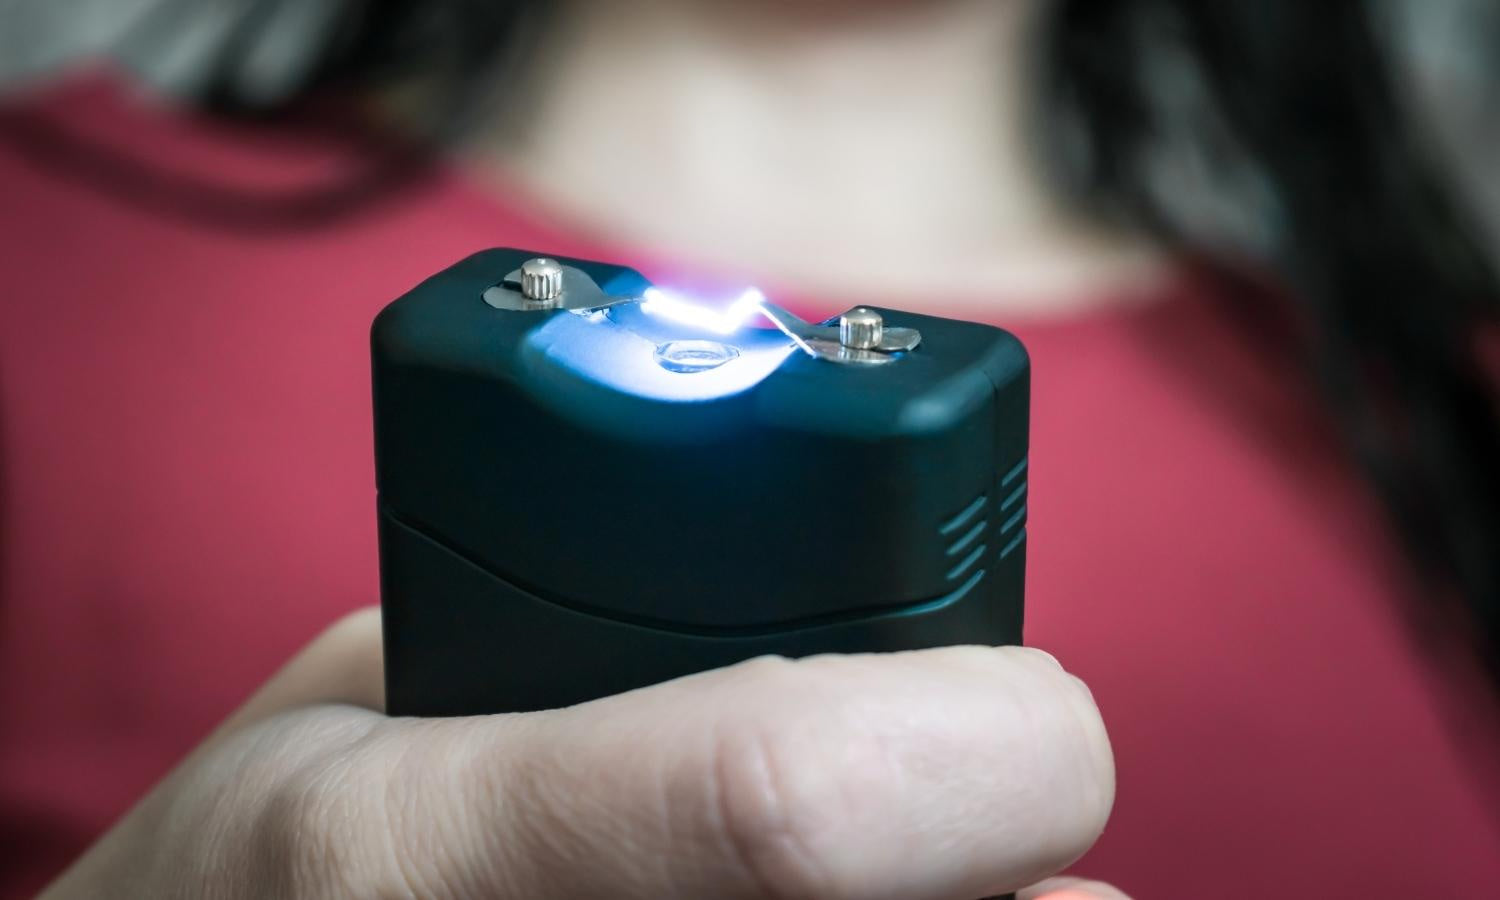 Tips on How to Use a Stun Gun Properly and Safely